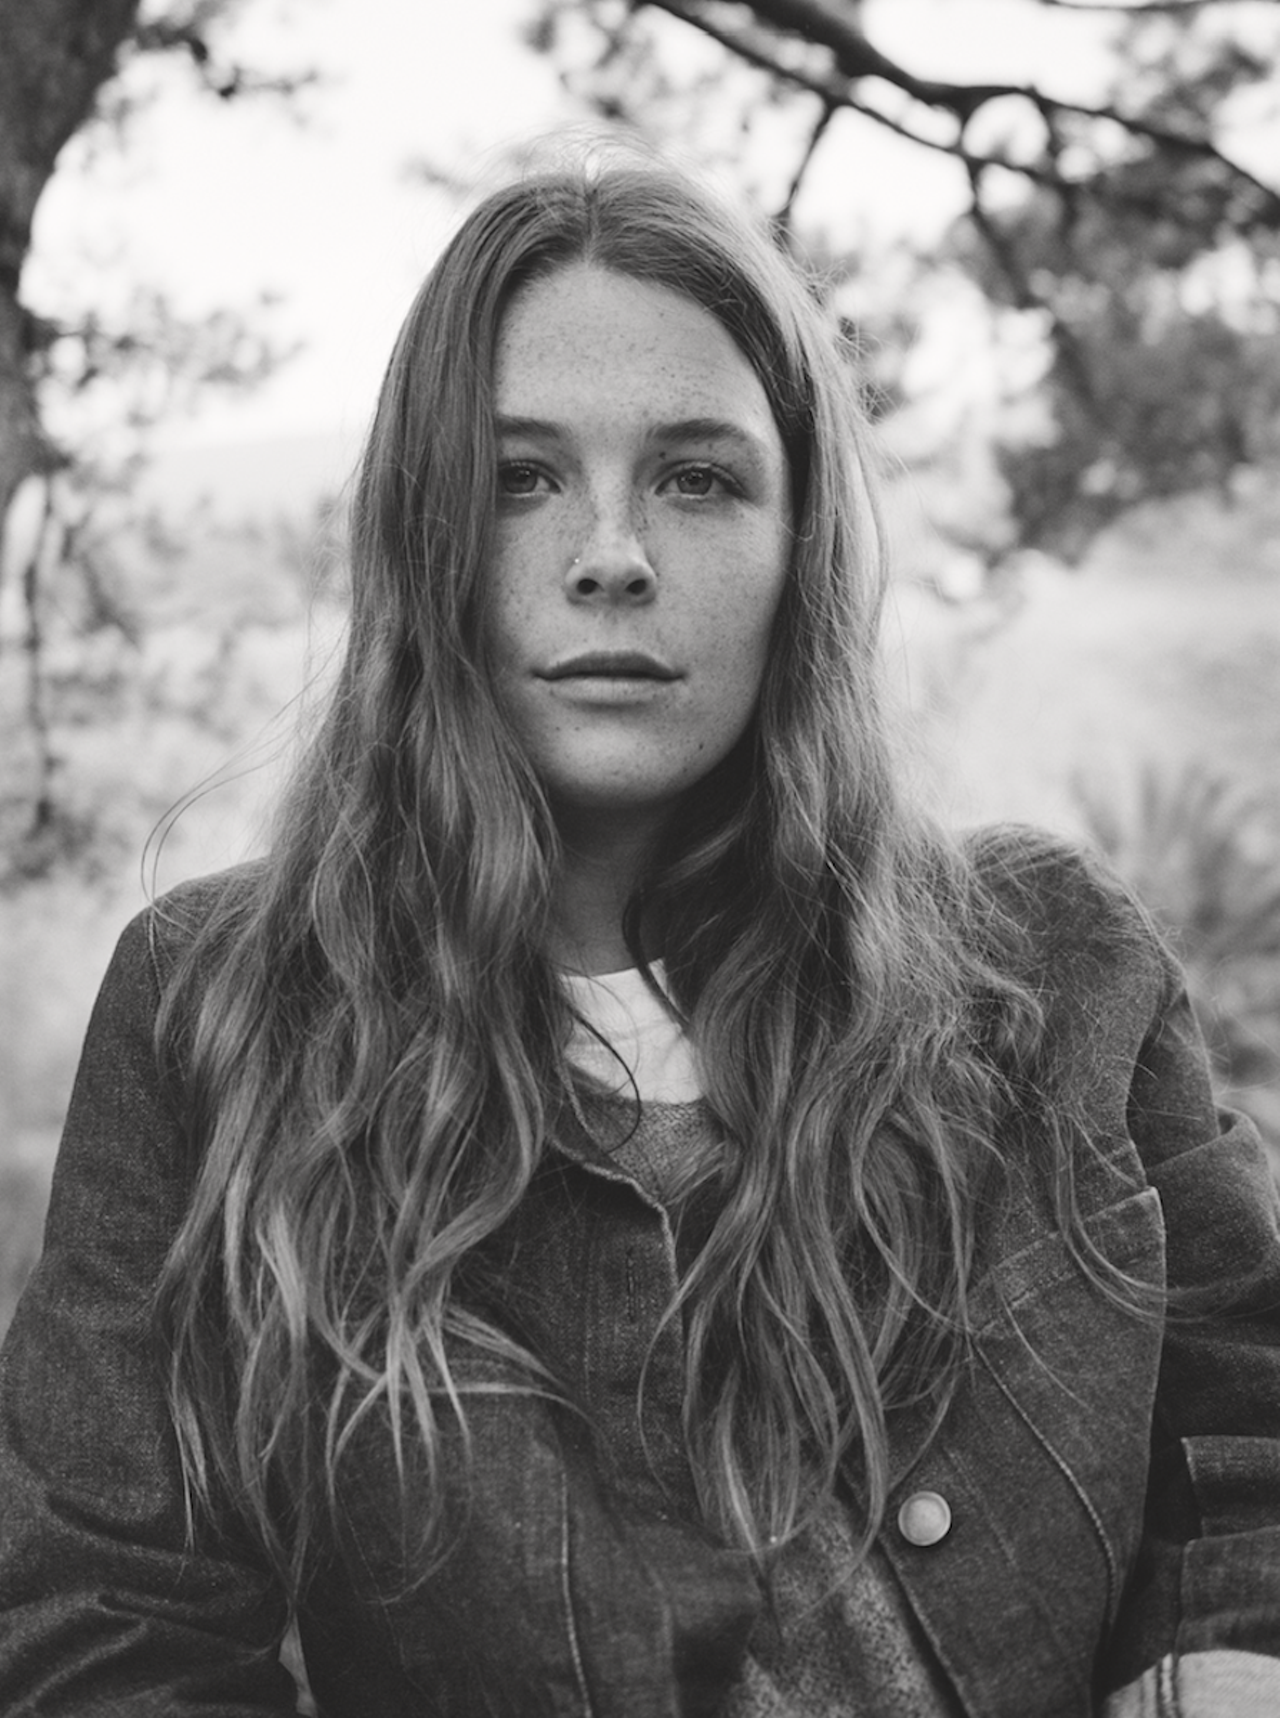 Maggie Rogers at the ICON Festival Stage at Smale Park
When: June 7 at 7:30 p.m.
Where: Andrew J Brady Music Center, The Banks
What: Musician Maggie Rogers will be performing with special guest The Japanese House.
Who: Maggie Rogers
Why: See Grammy-nominated songwriter and performer Maggie Rogers tour in support of her new album, Don't Forget Me. Indie pop artist The Japanese House will be opening for Rogers.